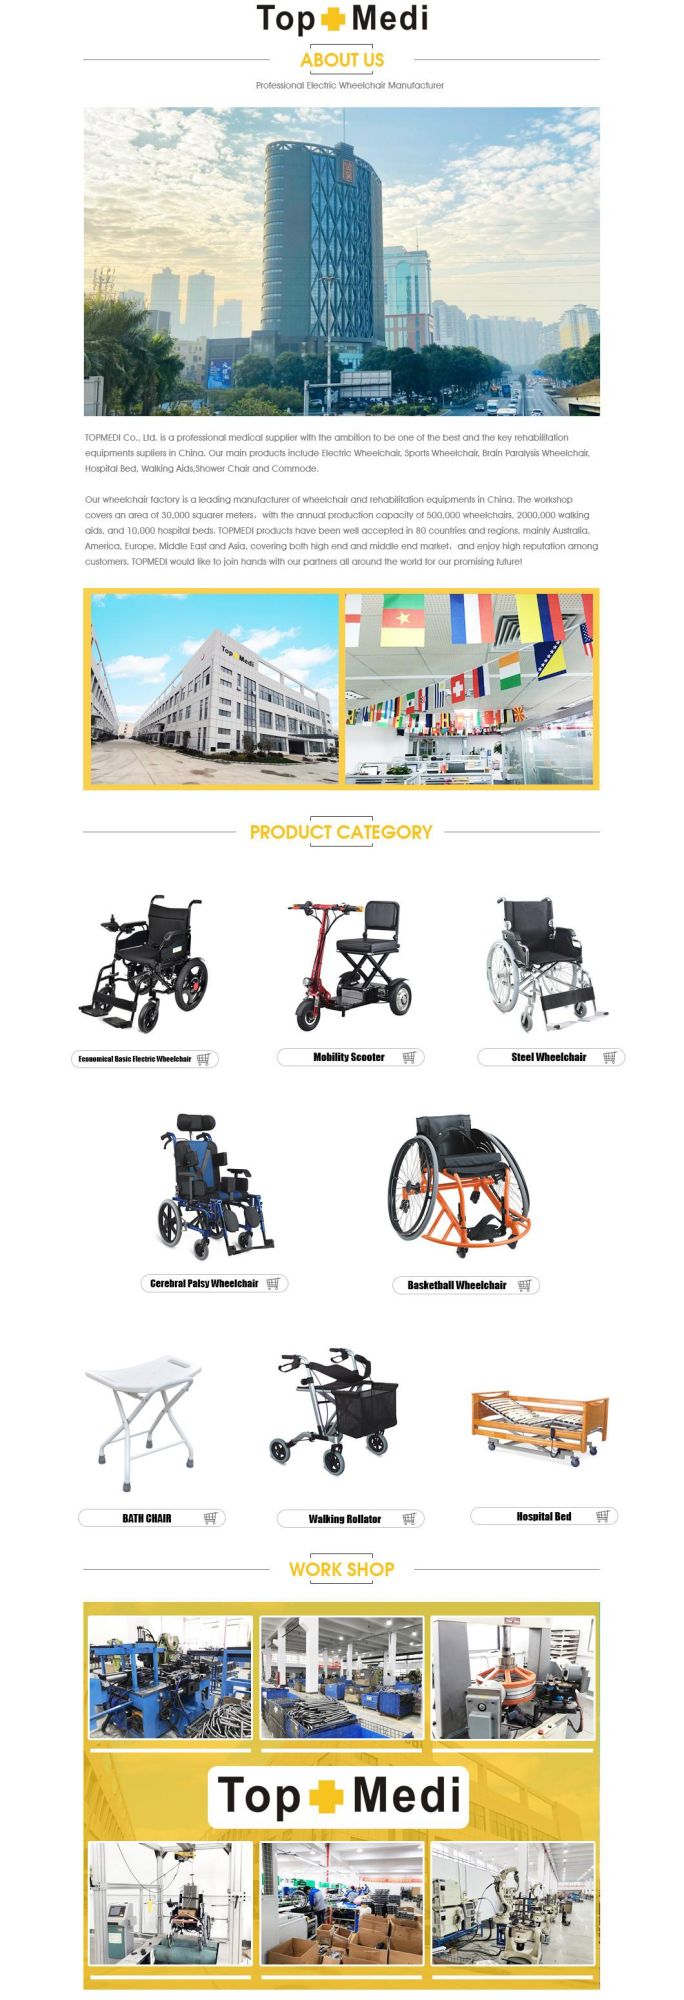 Good Service Elderly Multi-Function Wheel Chair Transferring Patient From Bed to Commode Wheelchair